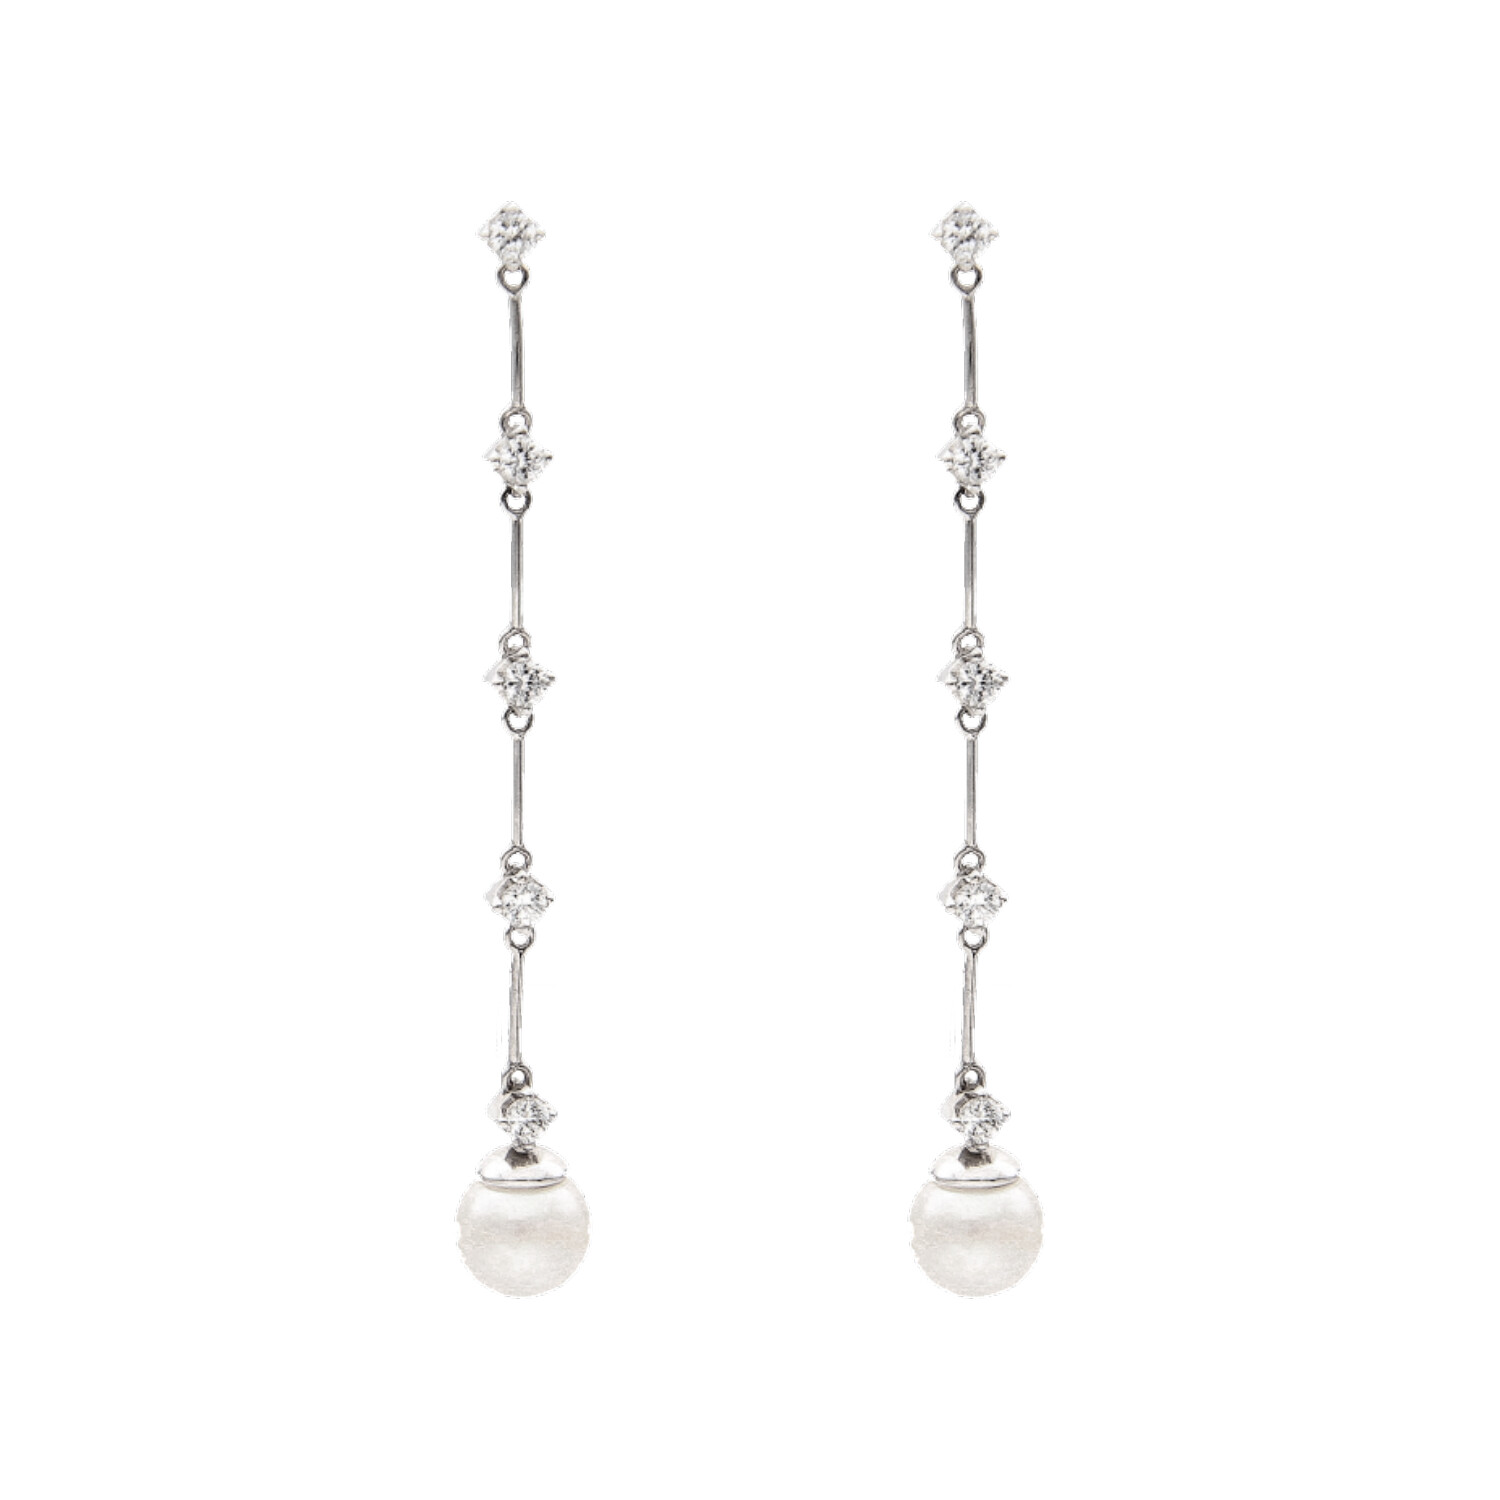 Earrings white gold with pearls and zircons